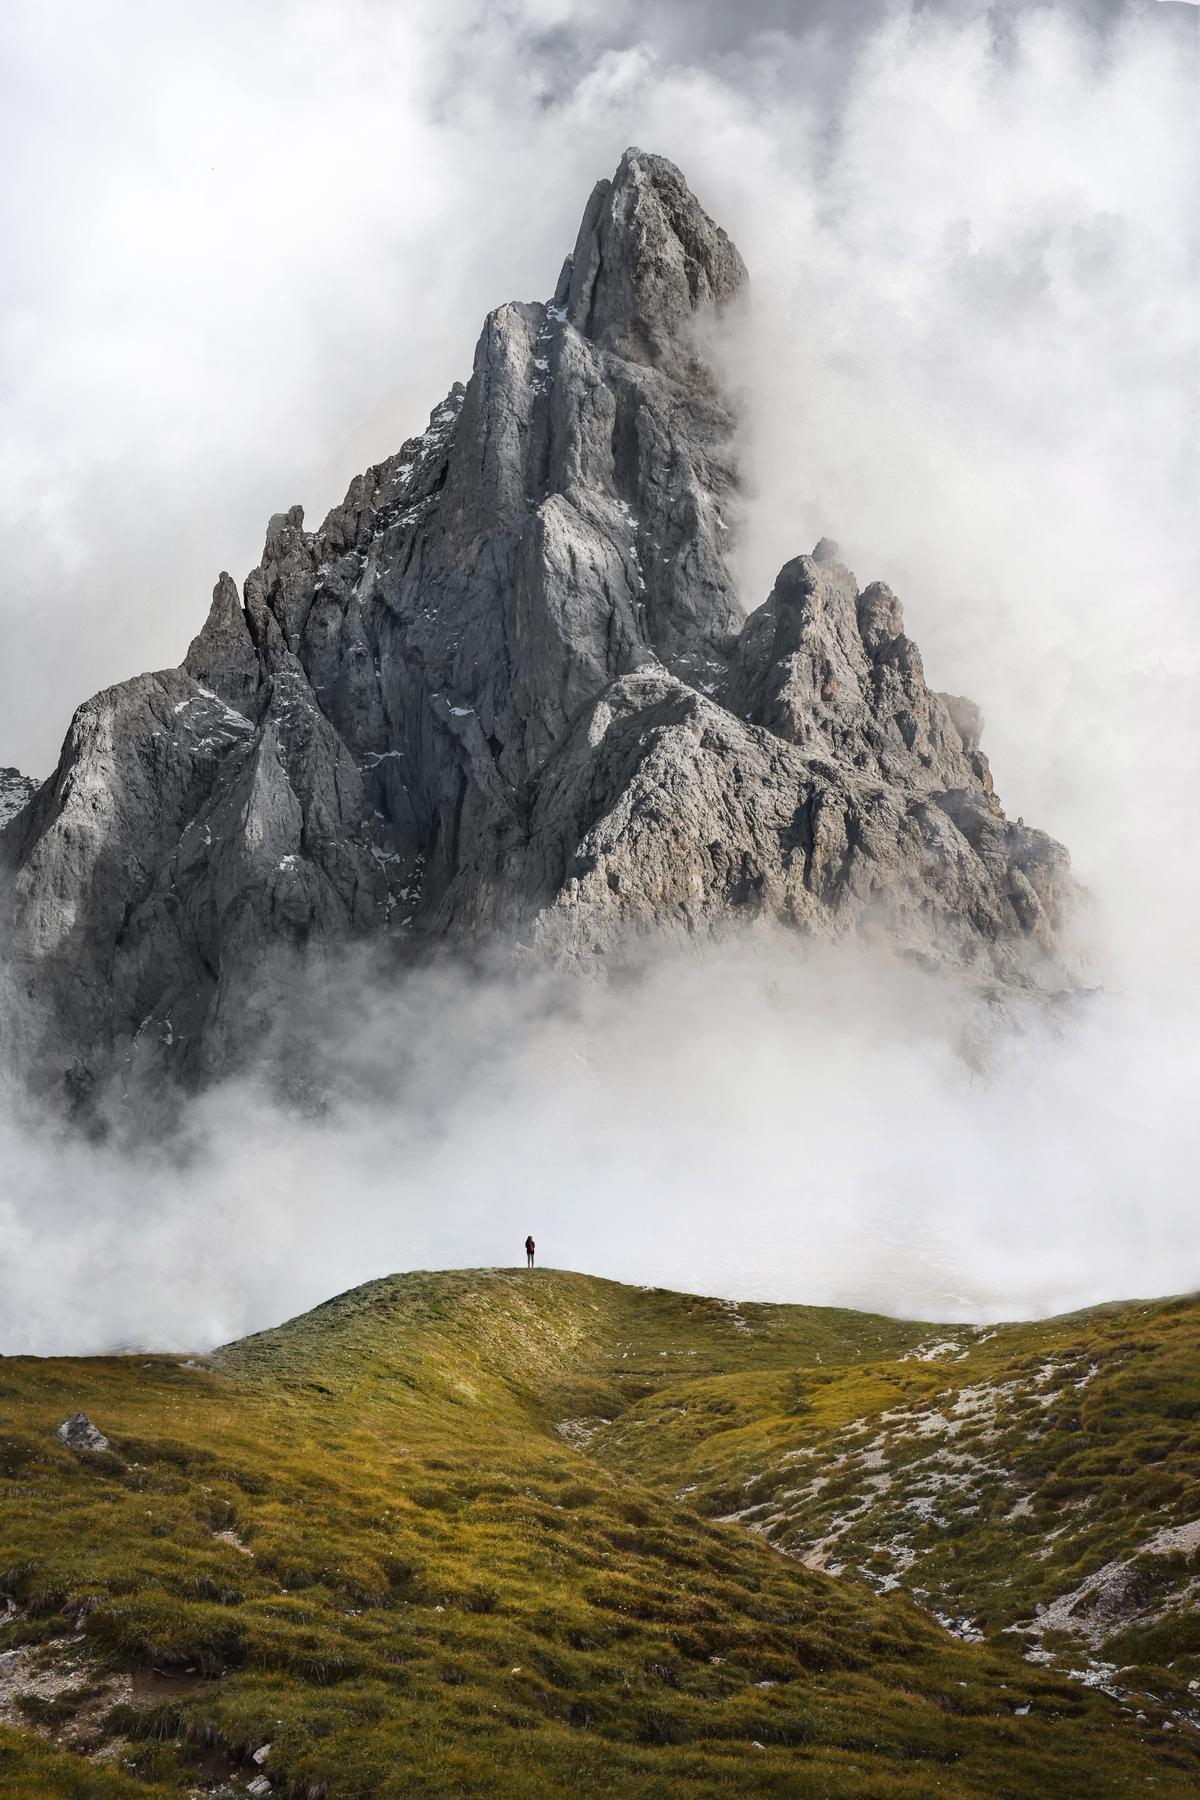 A person sitting on a rock with countless mountains in the background, symbolizing the strength to face life challenges with emotional resilience.